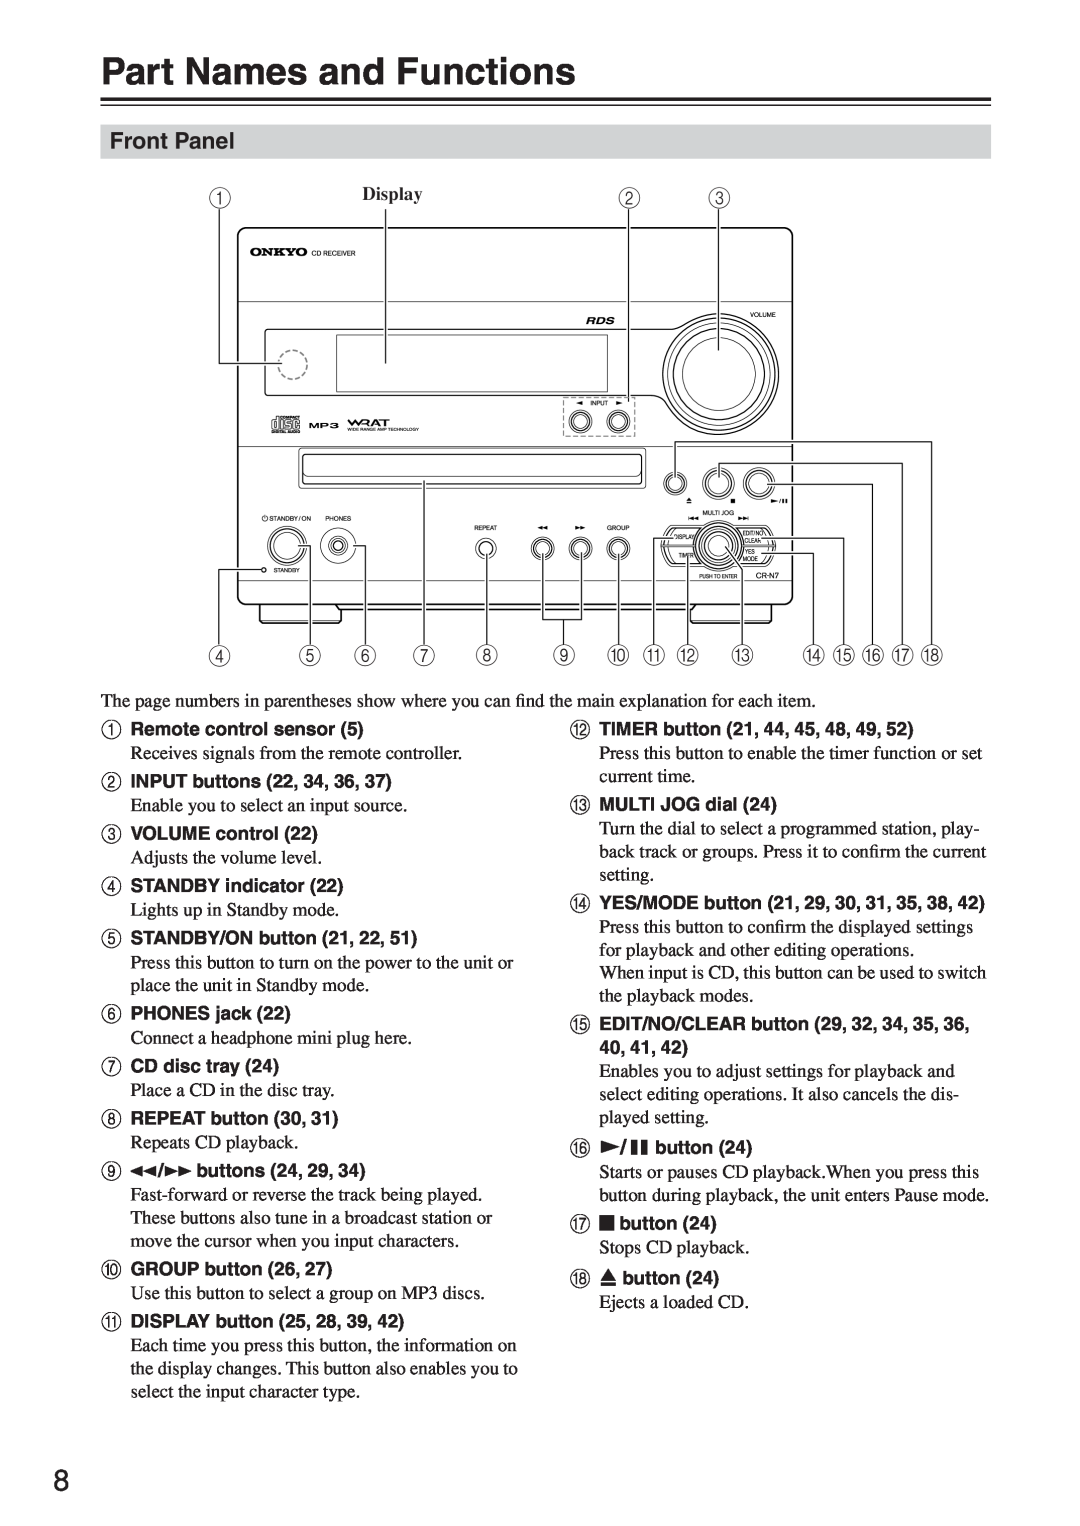 Onkyo CR-N7 instruction manual Part Names and Functions, Front Panel, 4 5 6 7 8 9 J K L M N O P Q R, Display 